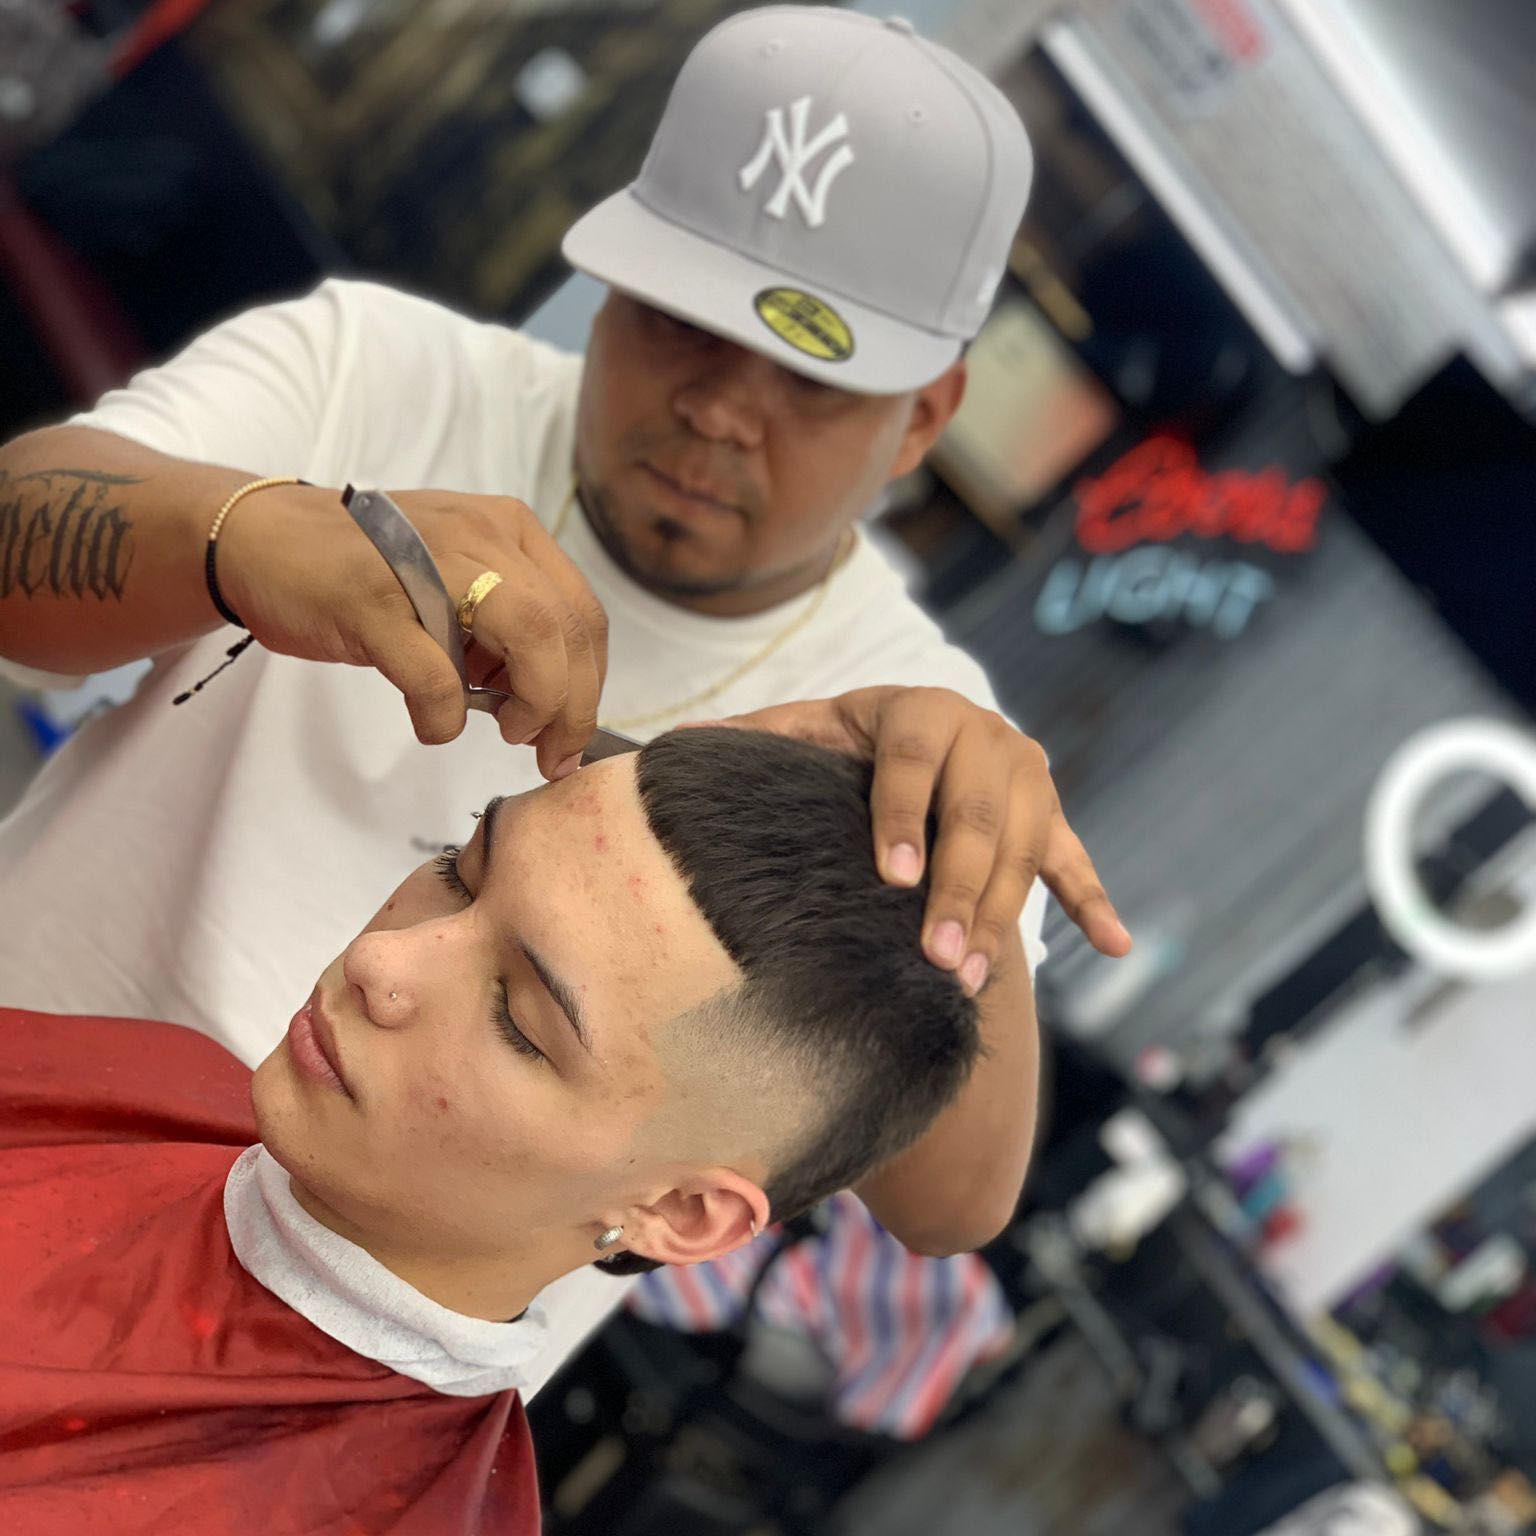 VALENCIA BARBER 🇨🇴💈, 81 Anderson Ave, Fairview, 07022